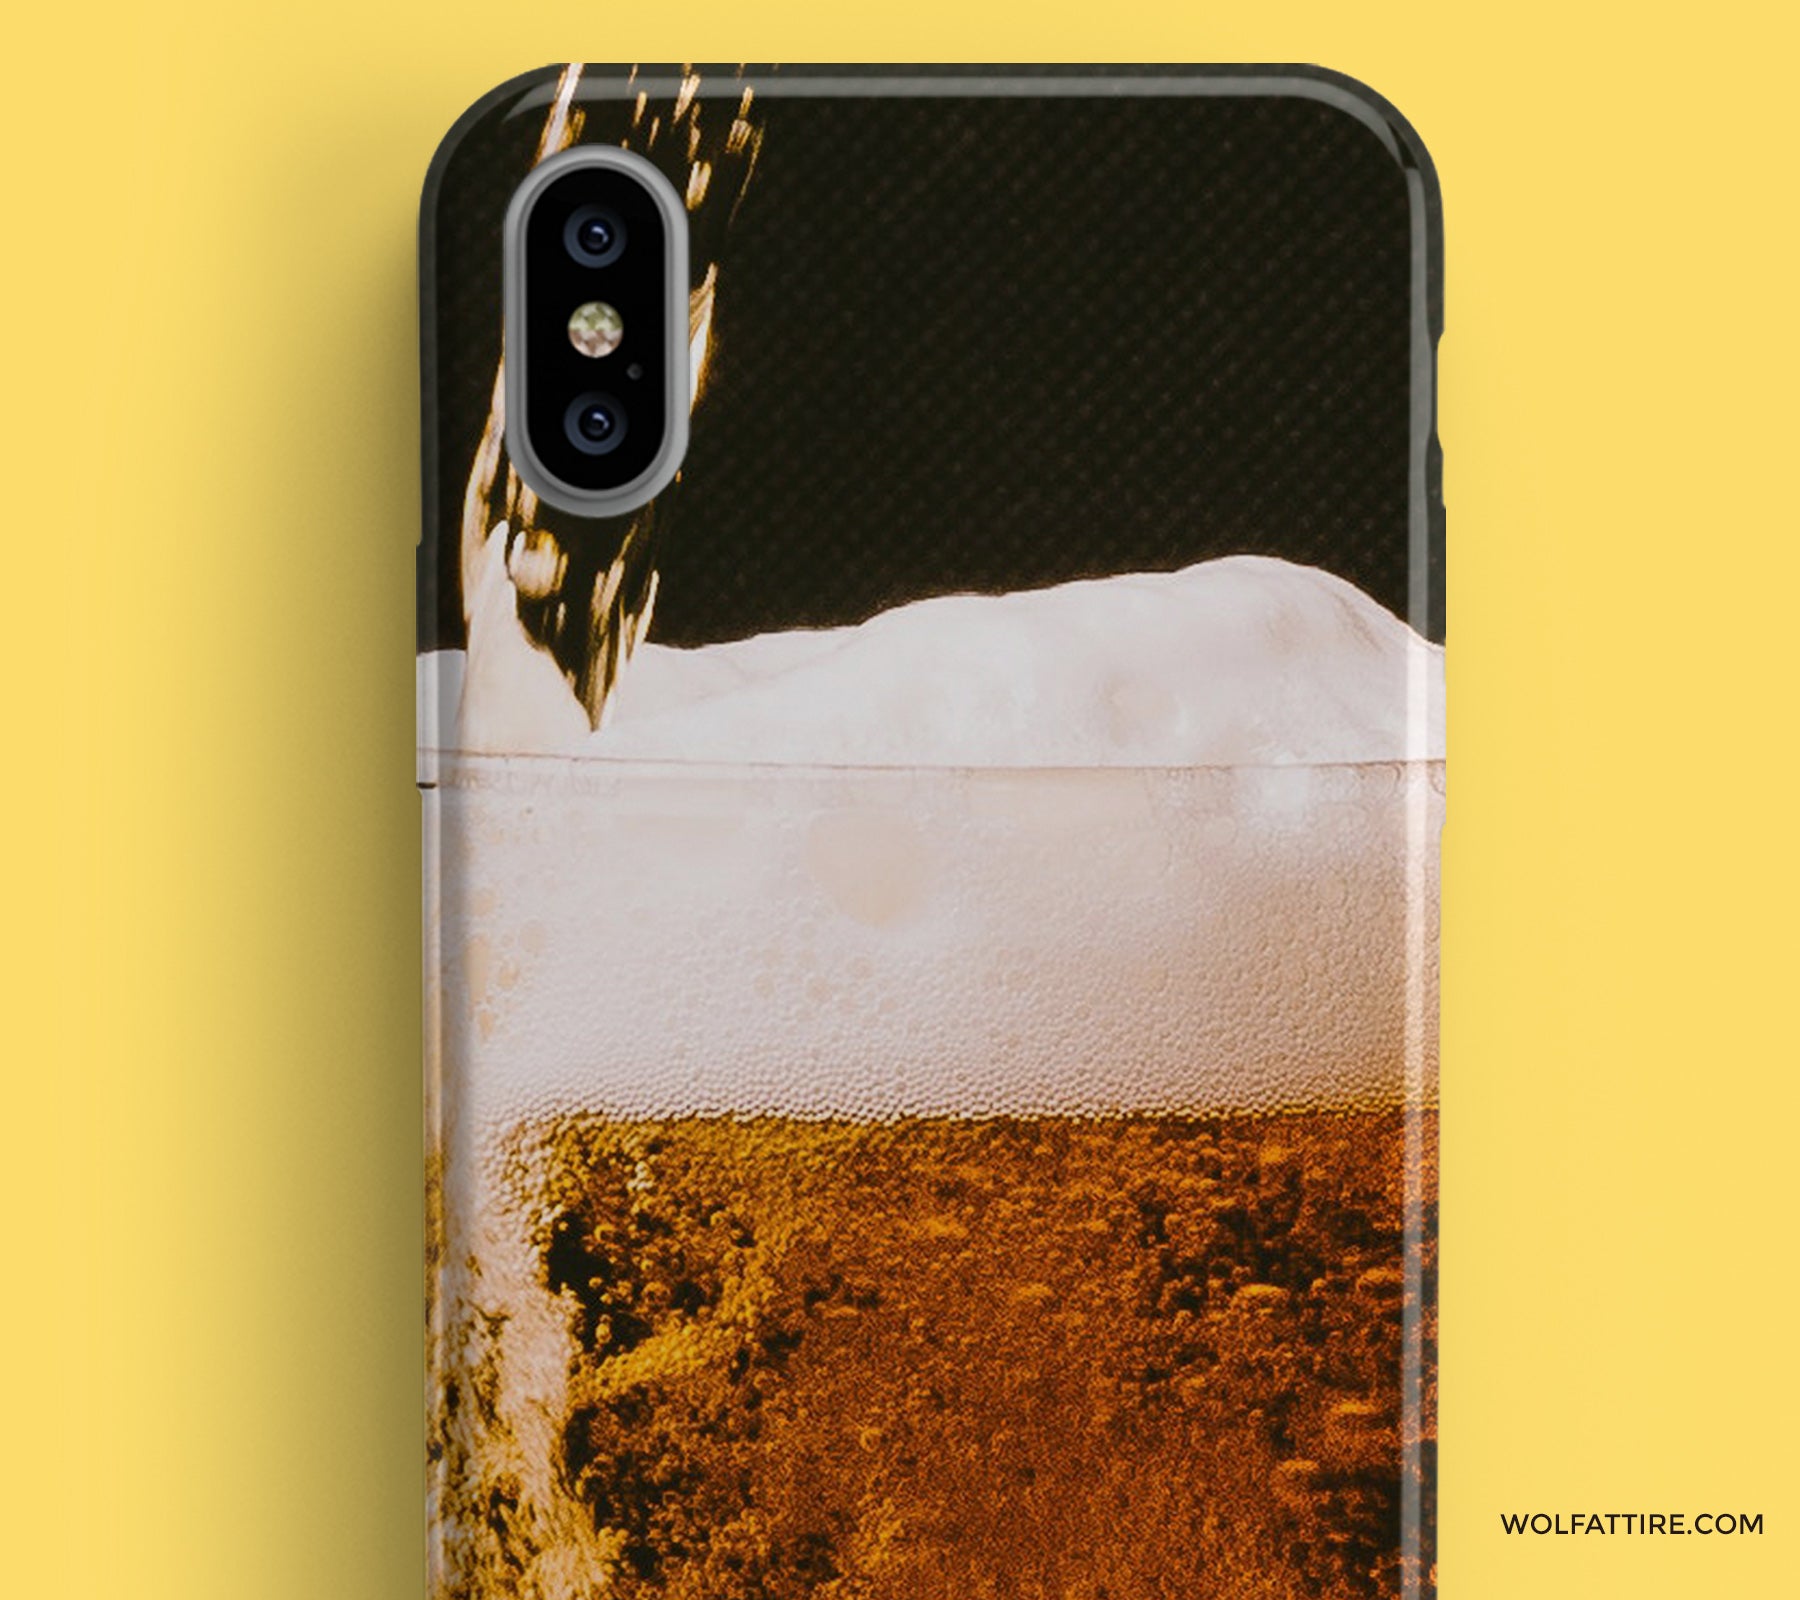 Beer iphone X covers and cases | shop online in India - Wolfattire